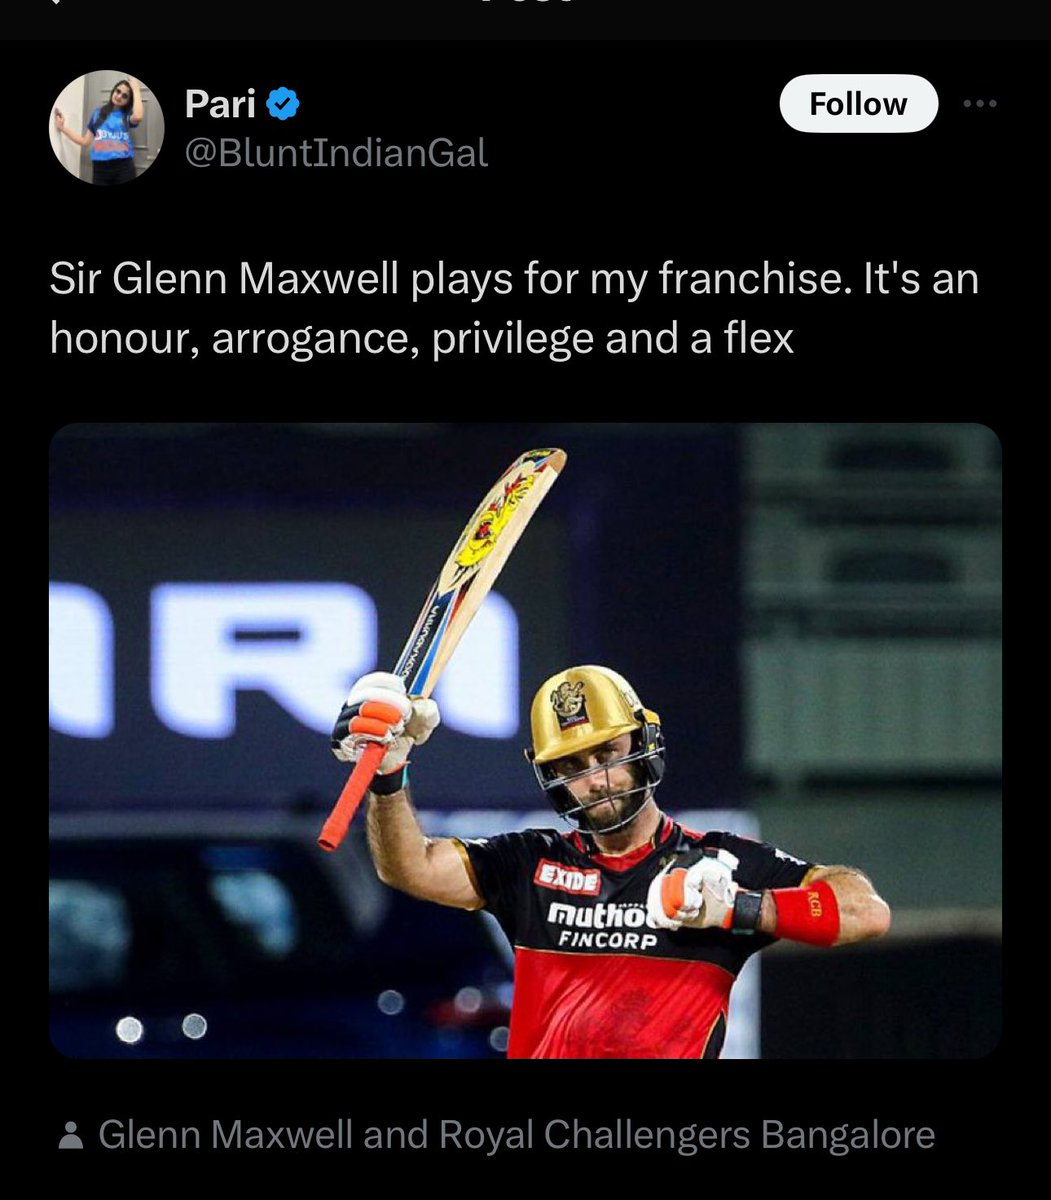 Thrilled to have Glenn Maxwell on my team – a true privilege and honor that I deeply appreciate! 🏏 #CricketJoy #MaxwellMagic
#Pari #GlenMaxwell #Australia #INDvAUS #ICC #ICCCricketWorldCup
#BluntindianGal 
#everyone
#followers